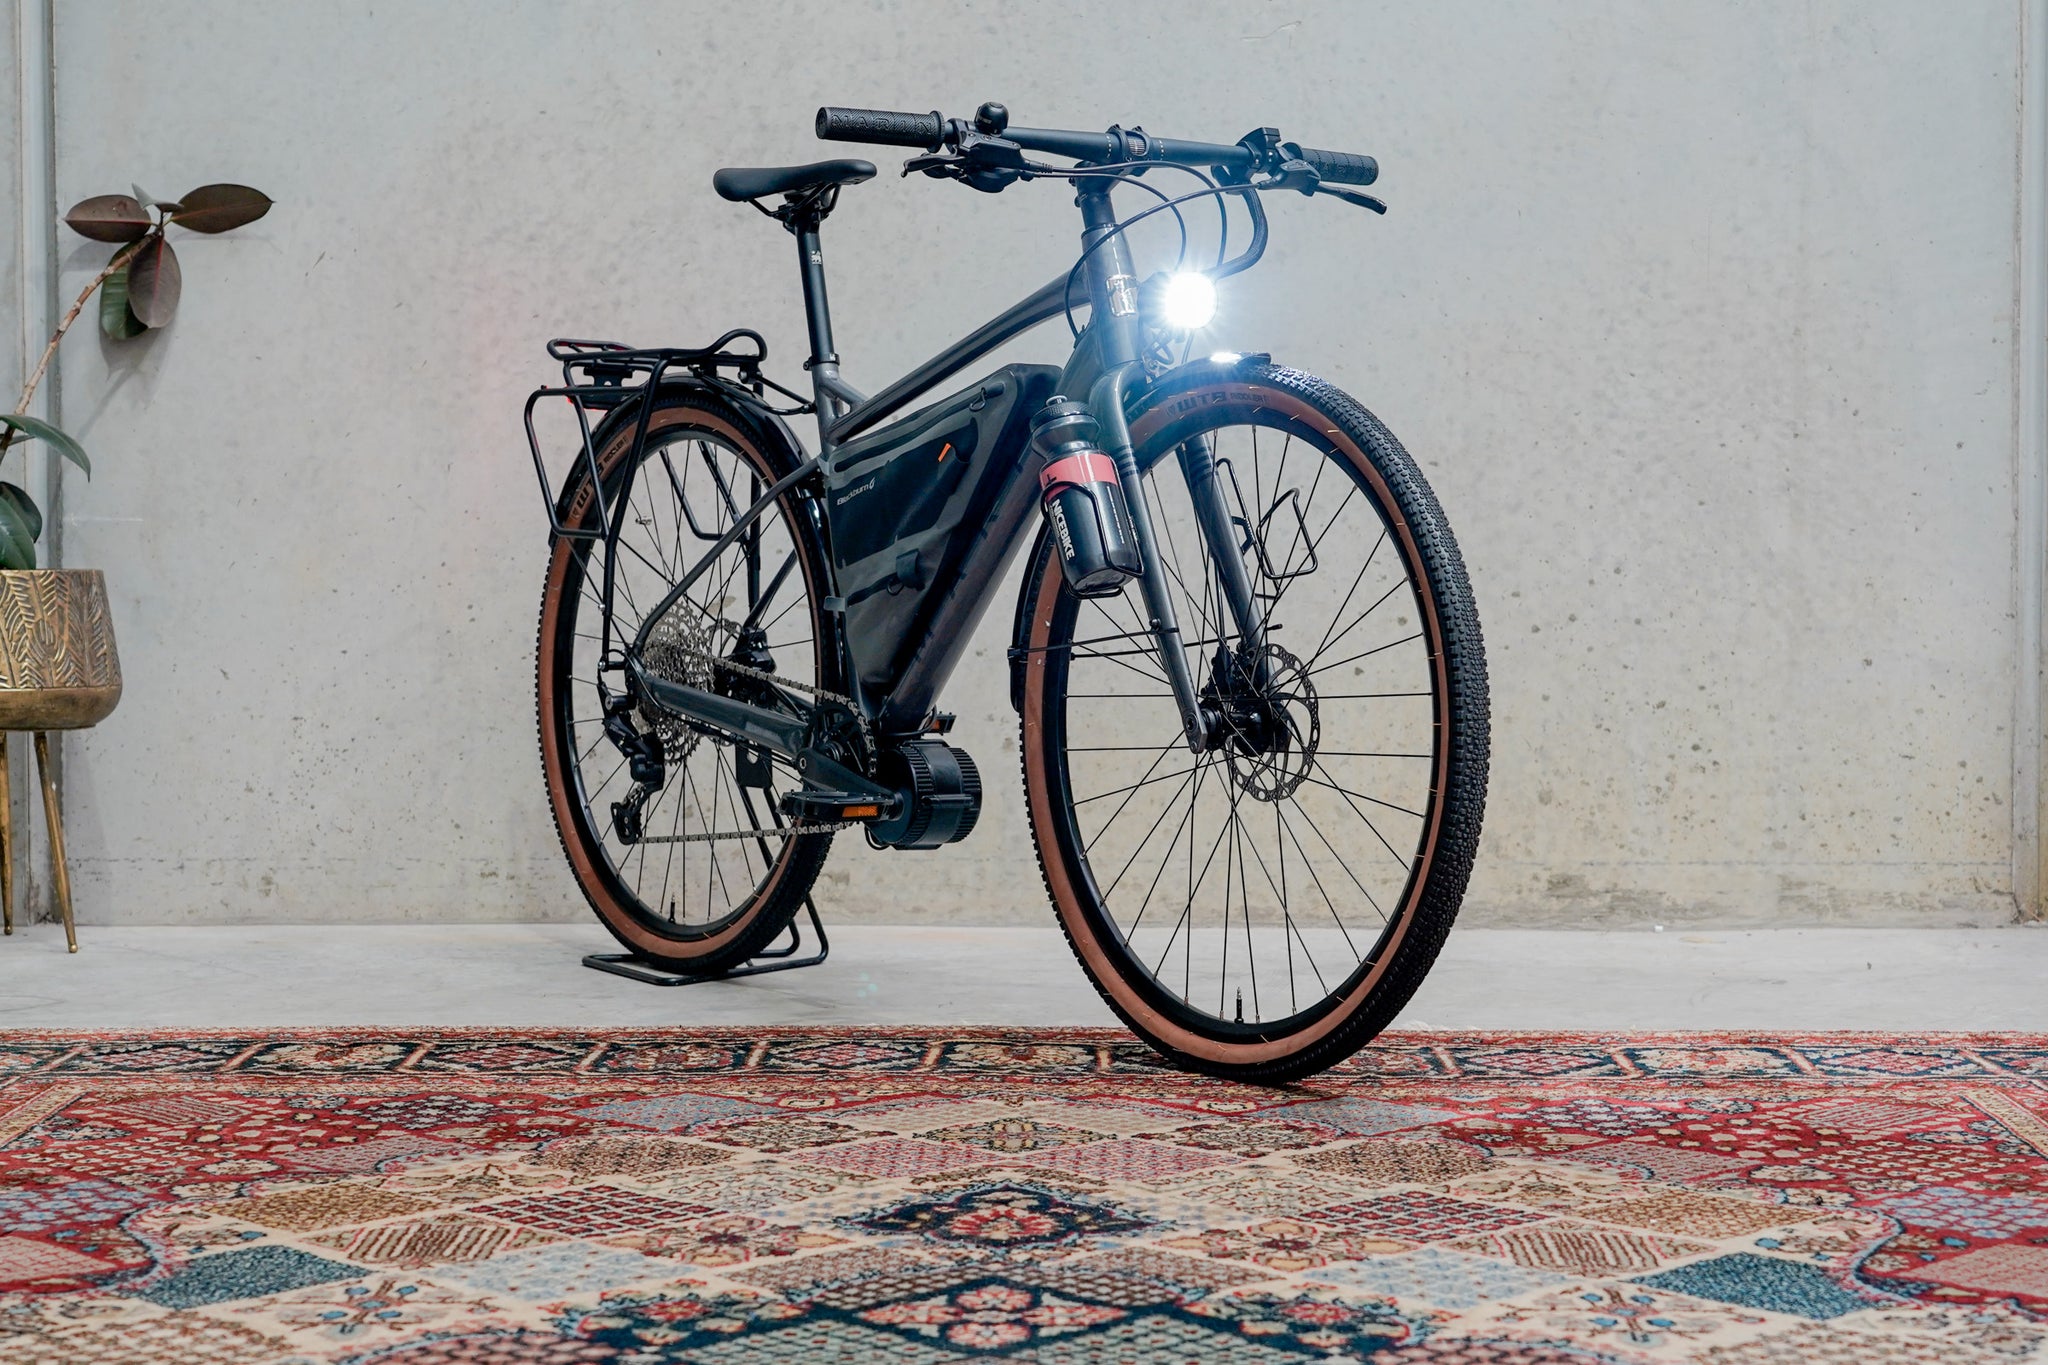 Marin Gravel ebike for commuting - Quick Charge!